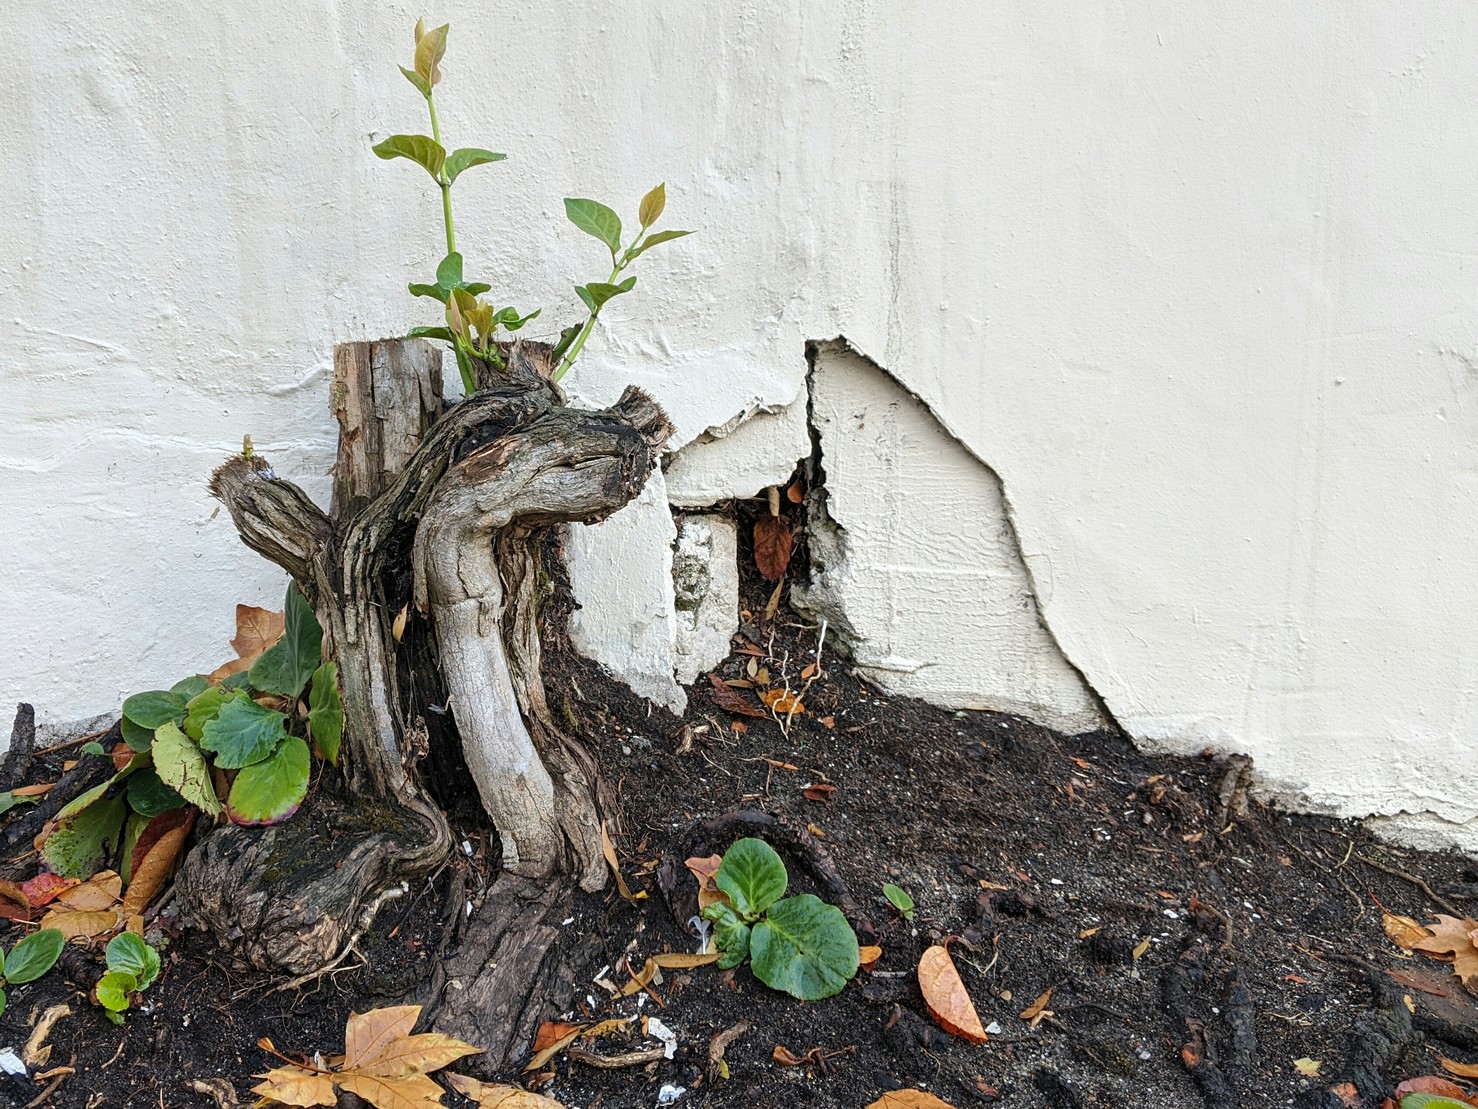 Spotted while walking down the street.#photo #TreeStump 